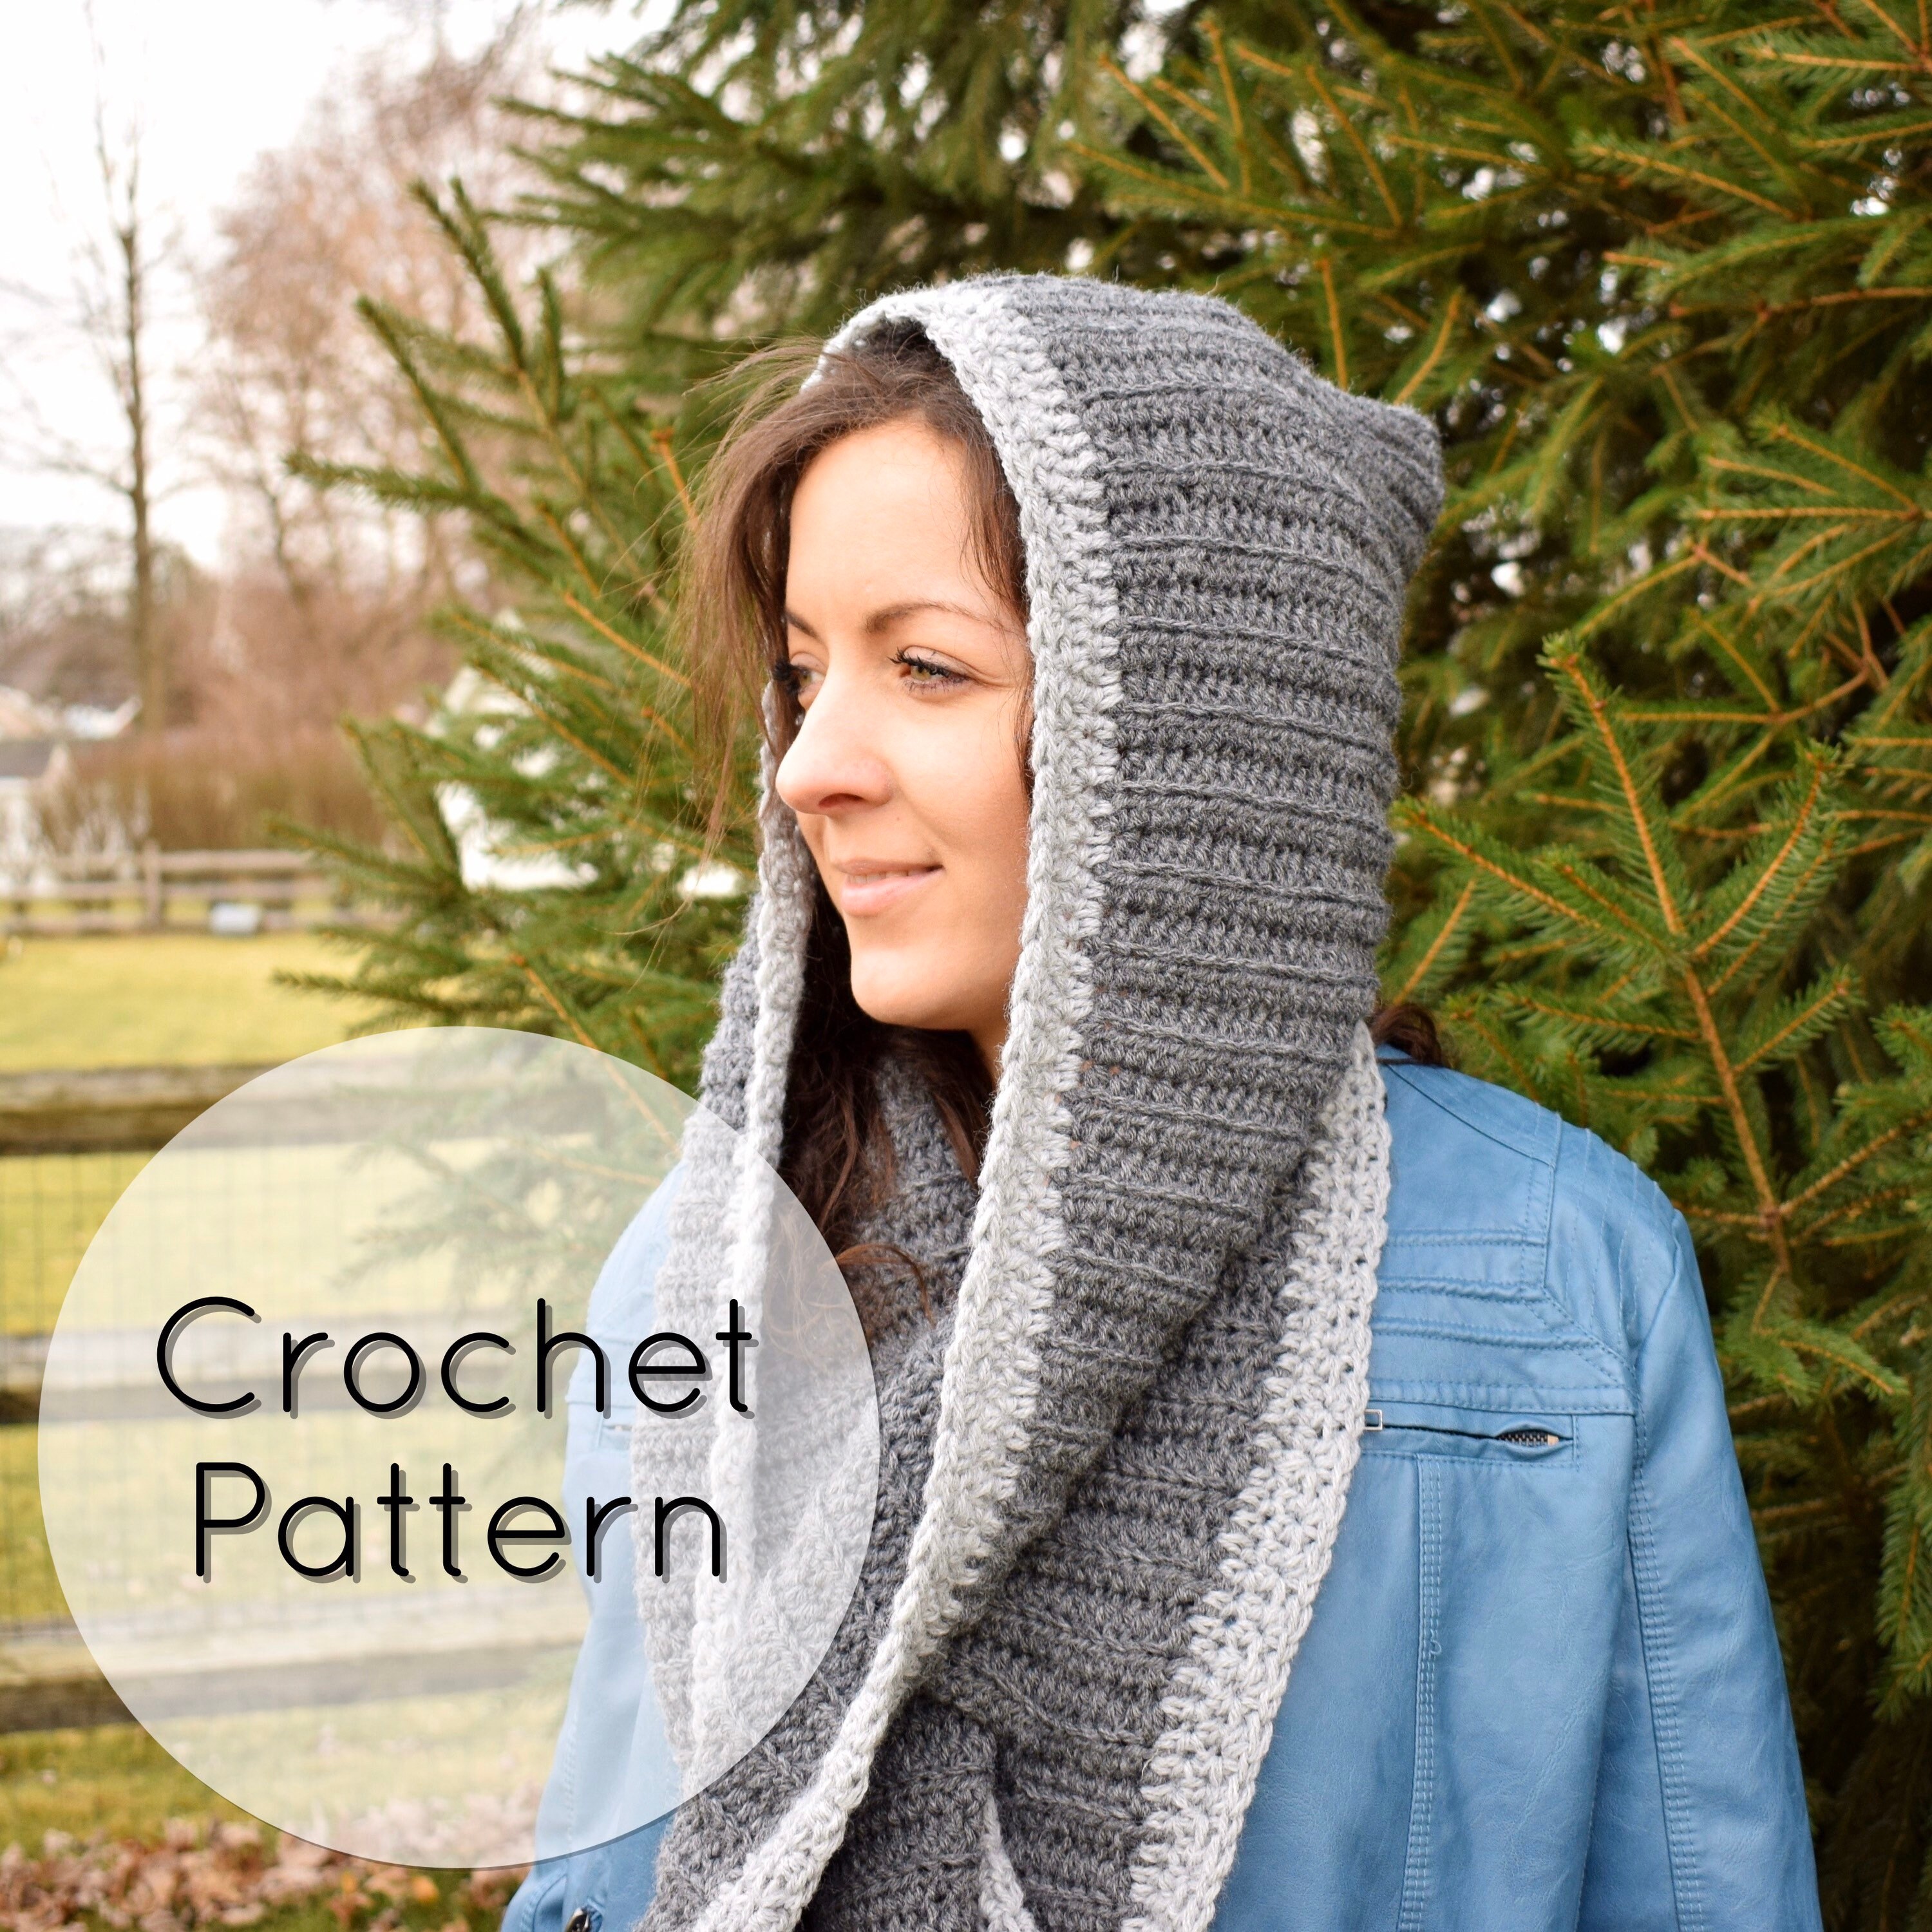 17 Hooded Scarf Crochet Patterns – Great Cozy Gift - A More Crafty